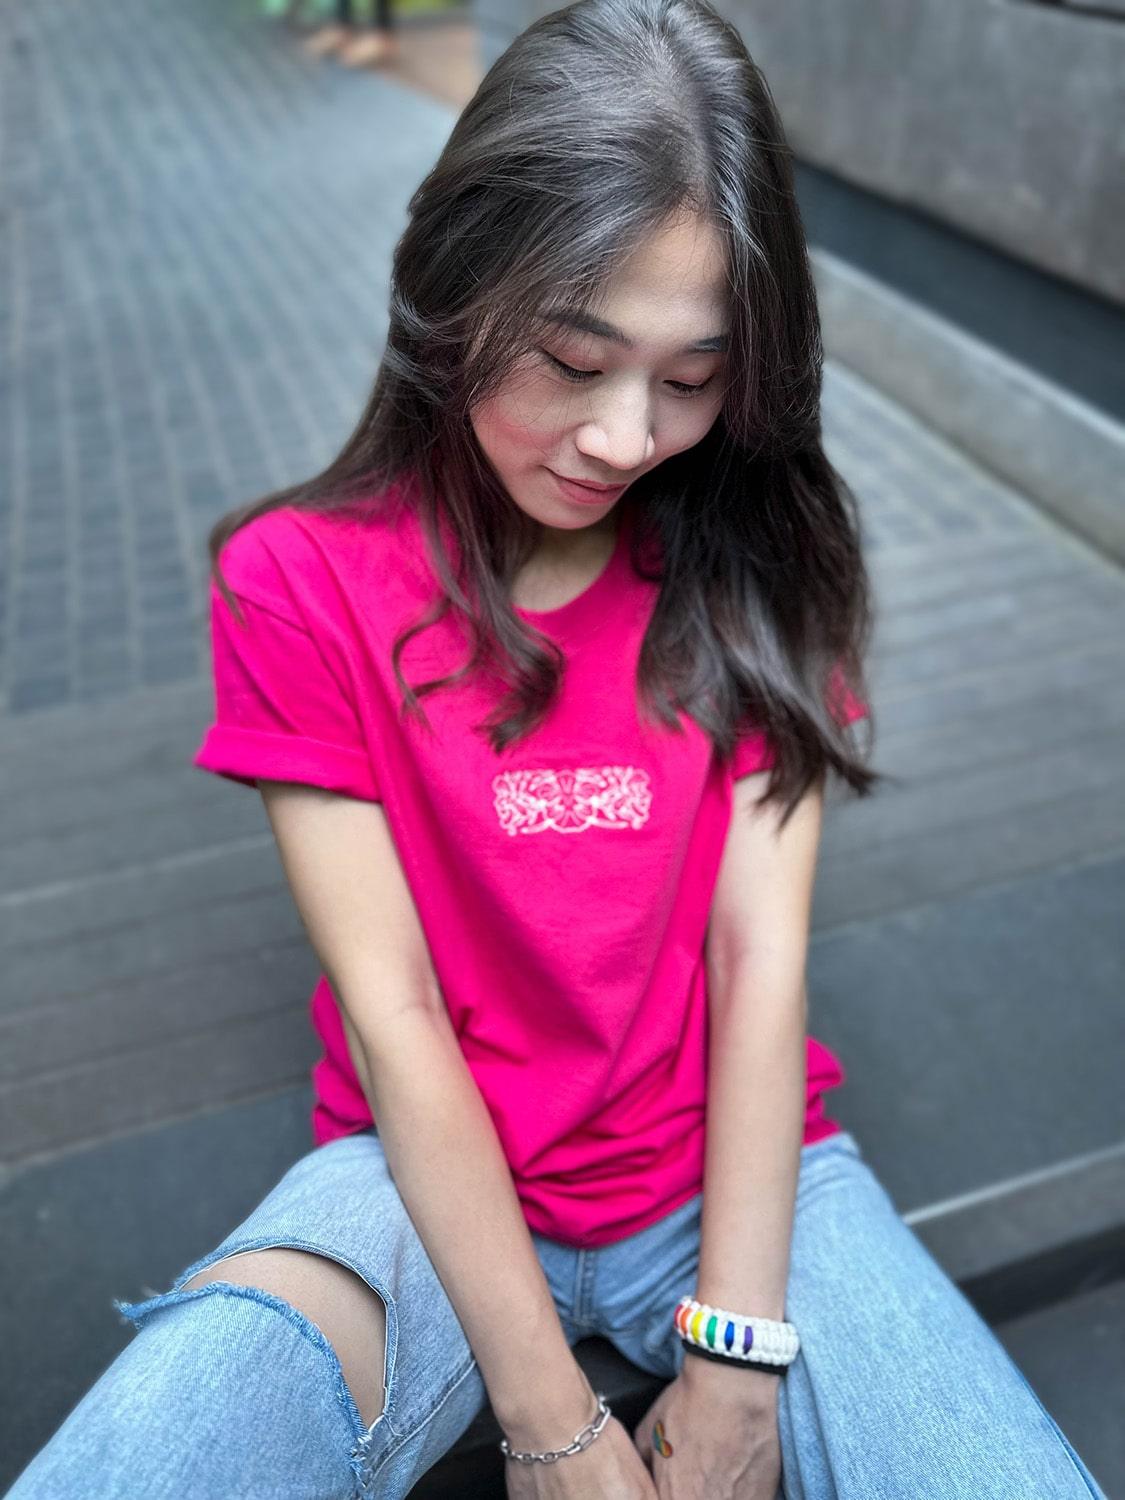 An Asian female with long hair is wearing a hot pink t-shirt adorned with an embroidery design of the classic batik orchid flower on the front. TOMSCOUT Flourish - LGBT Pride Kits (Singapore)